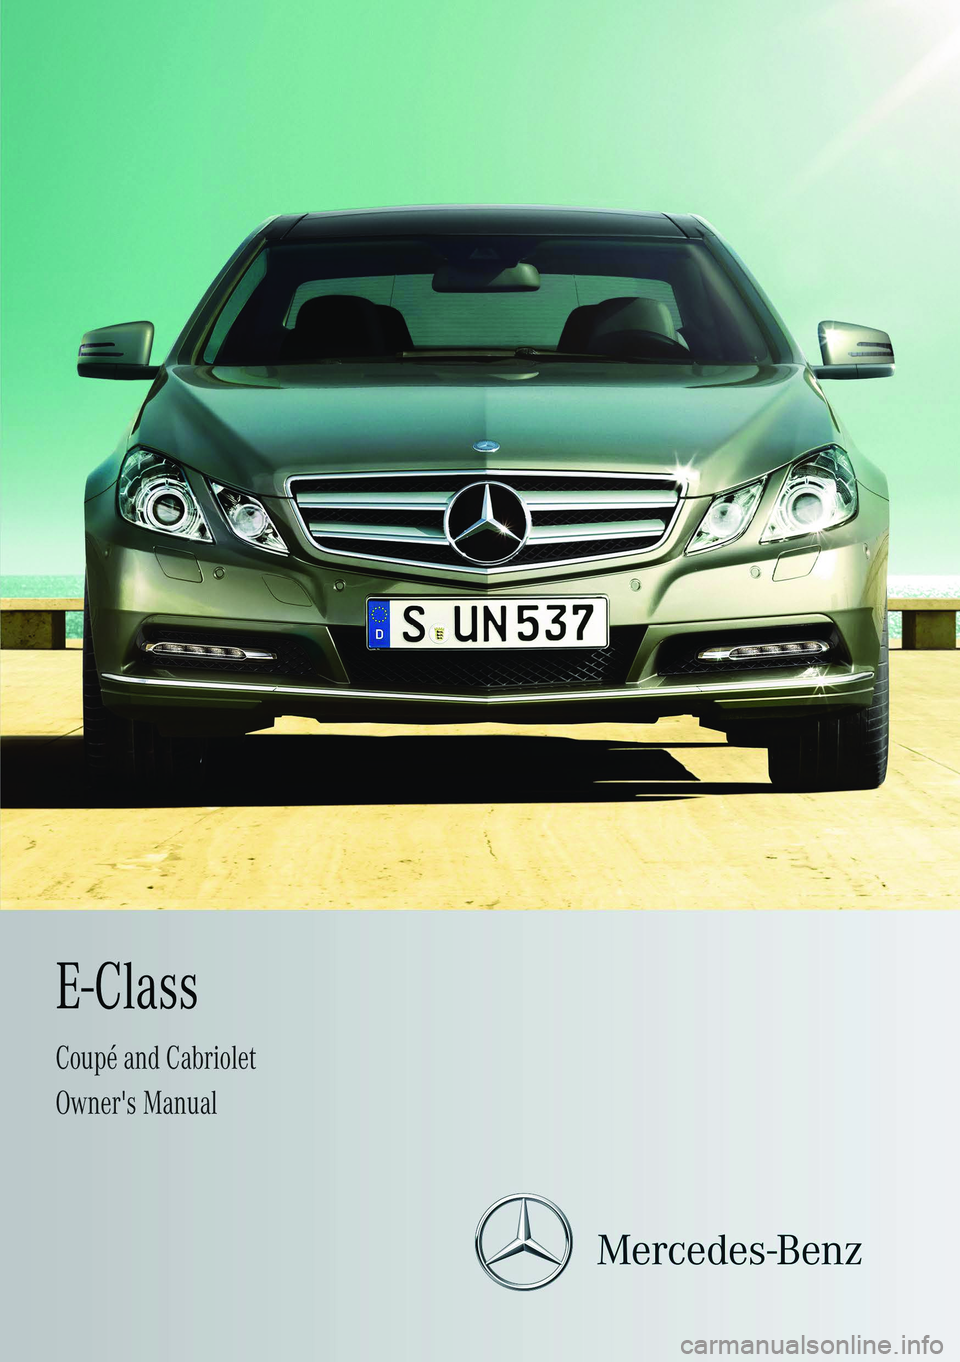 MERCEDES-BENZ E-CLASS COUPE 2011  Owners Manual 